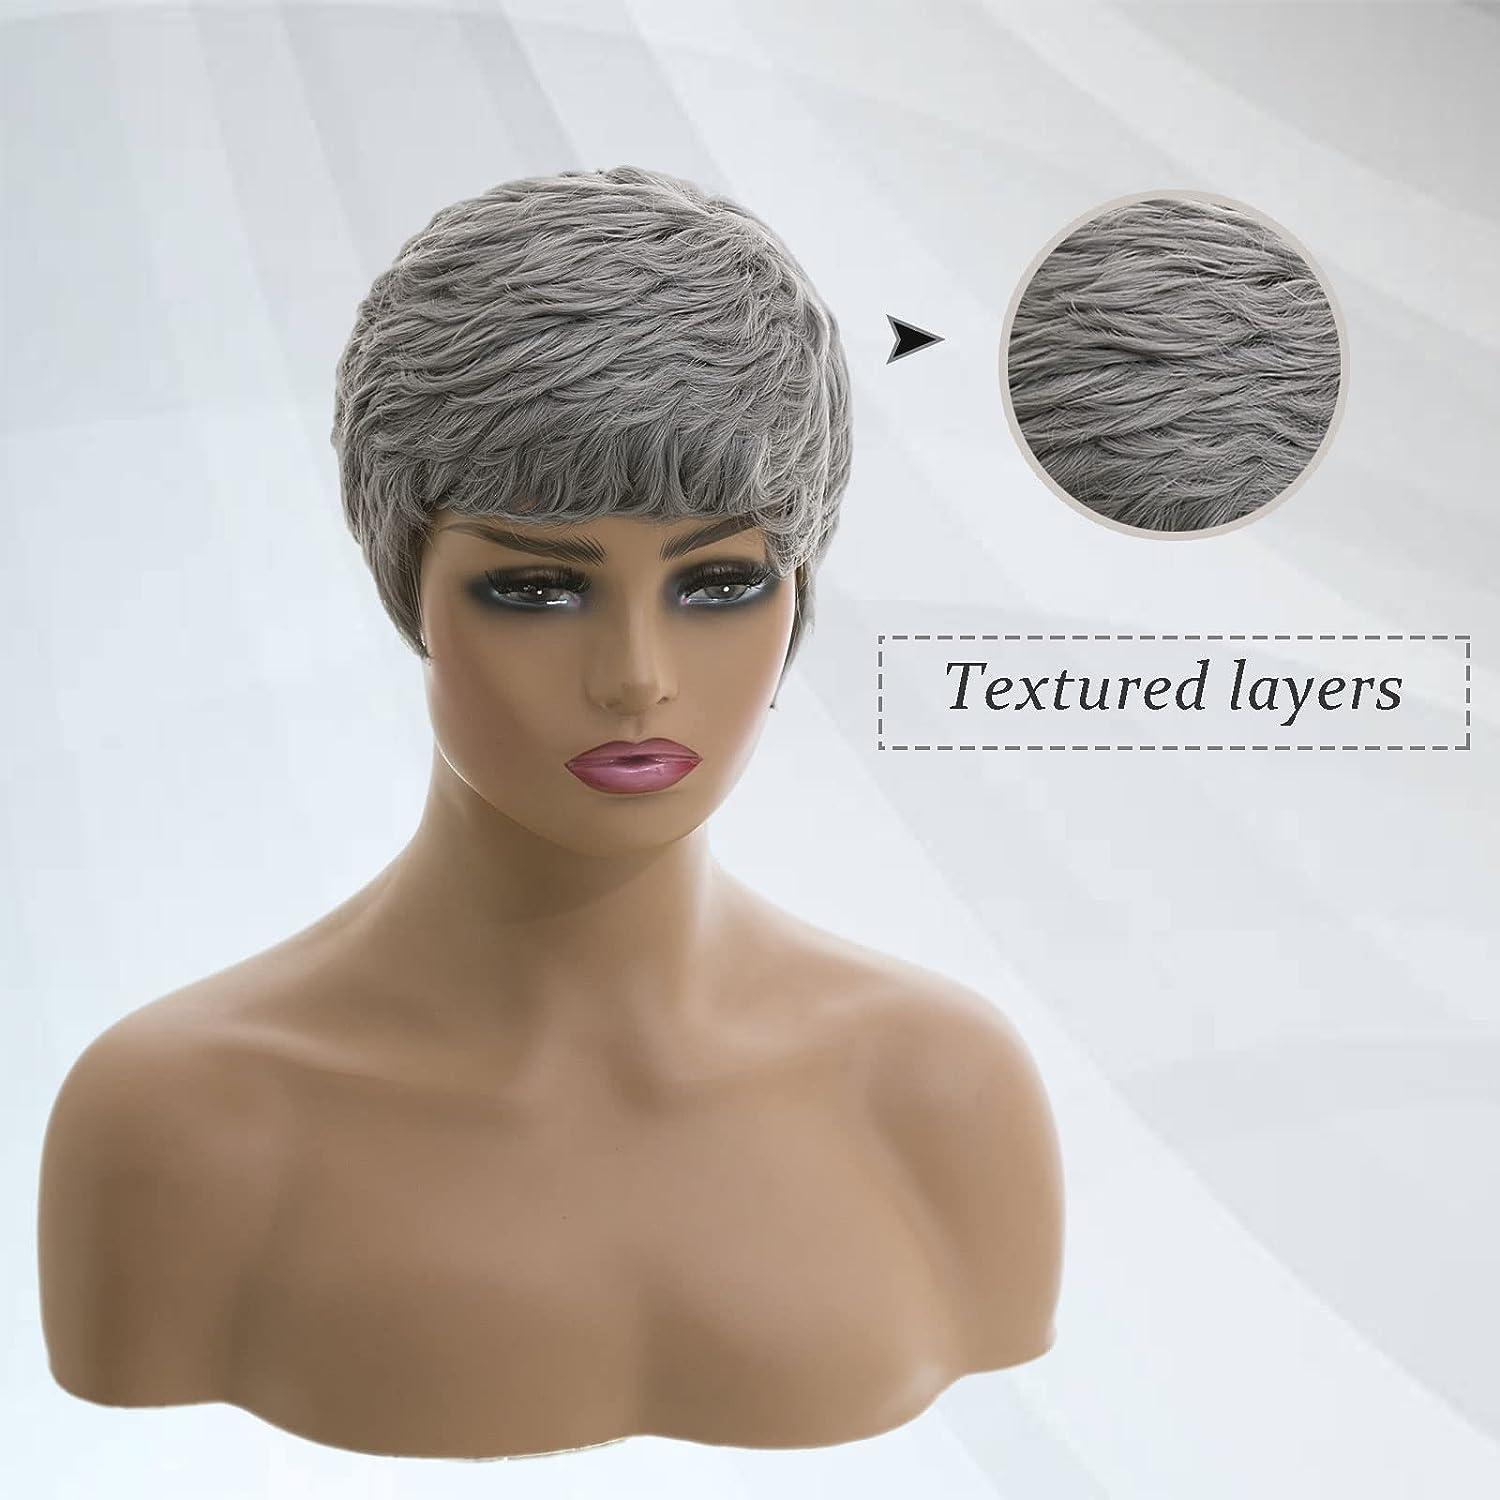 Gray Wig for Women, Elegant Fluffy Silver Gray Pixie Cut Wig Natural Appearance Thickened Mixed Curly Hair Wig Suitable for Daily Party Use for